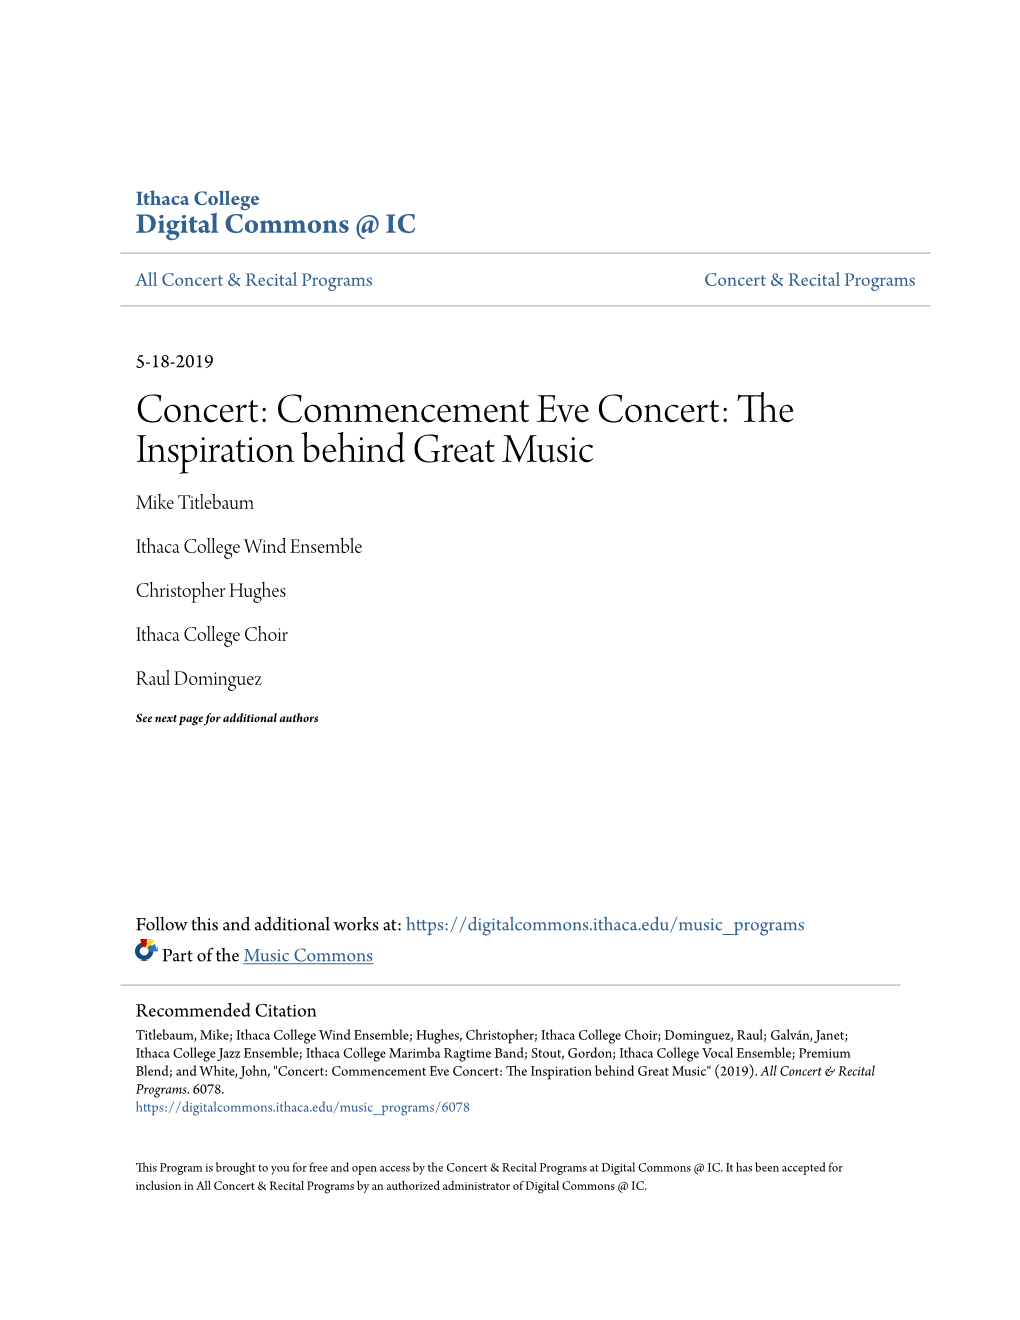 Commencement Eve Concert: the Inspiration Behind Great Music Mike Titlebaum